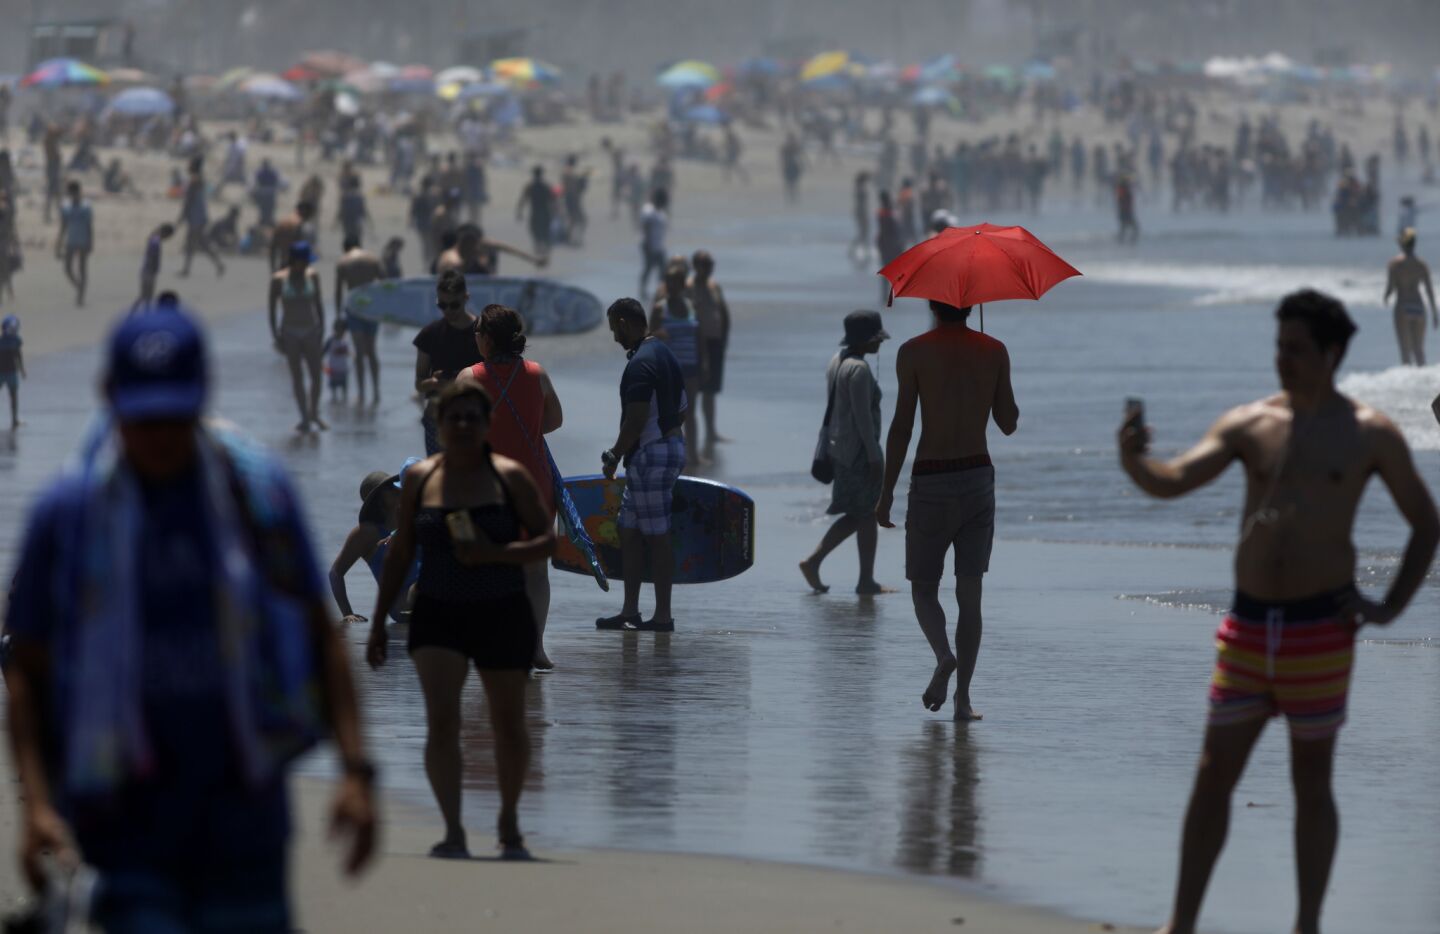 Visitors cool off in the surf in Santa Monica.